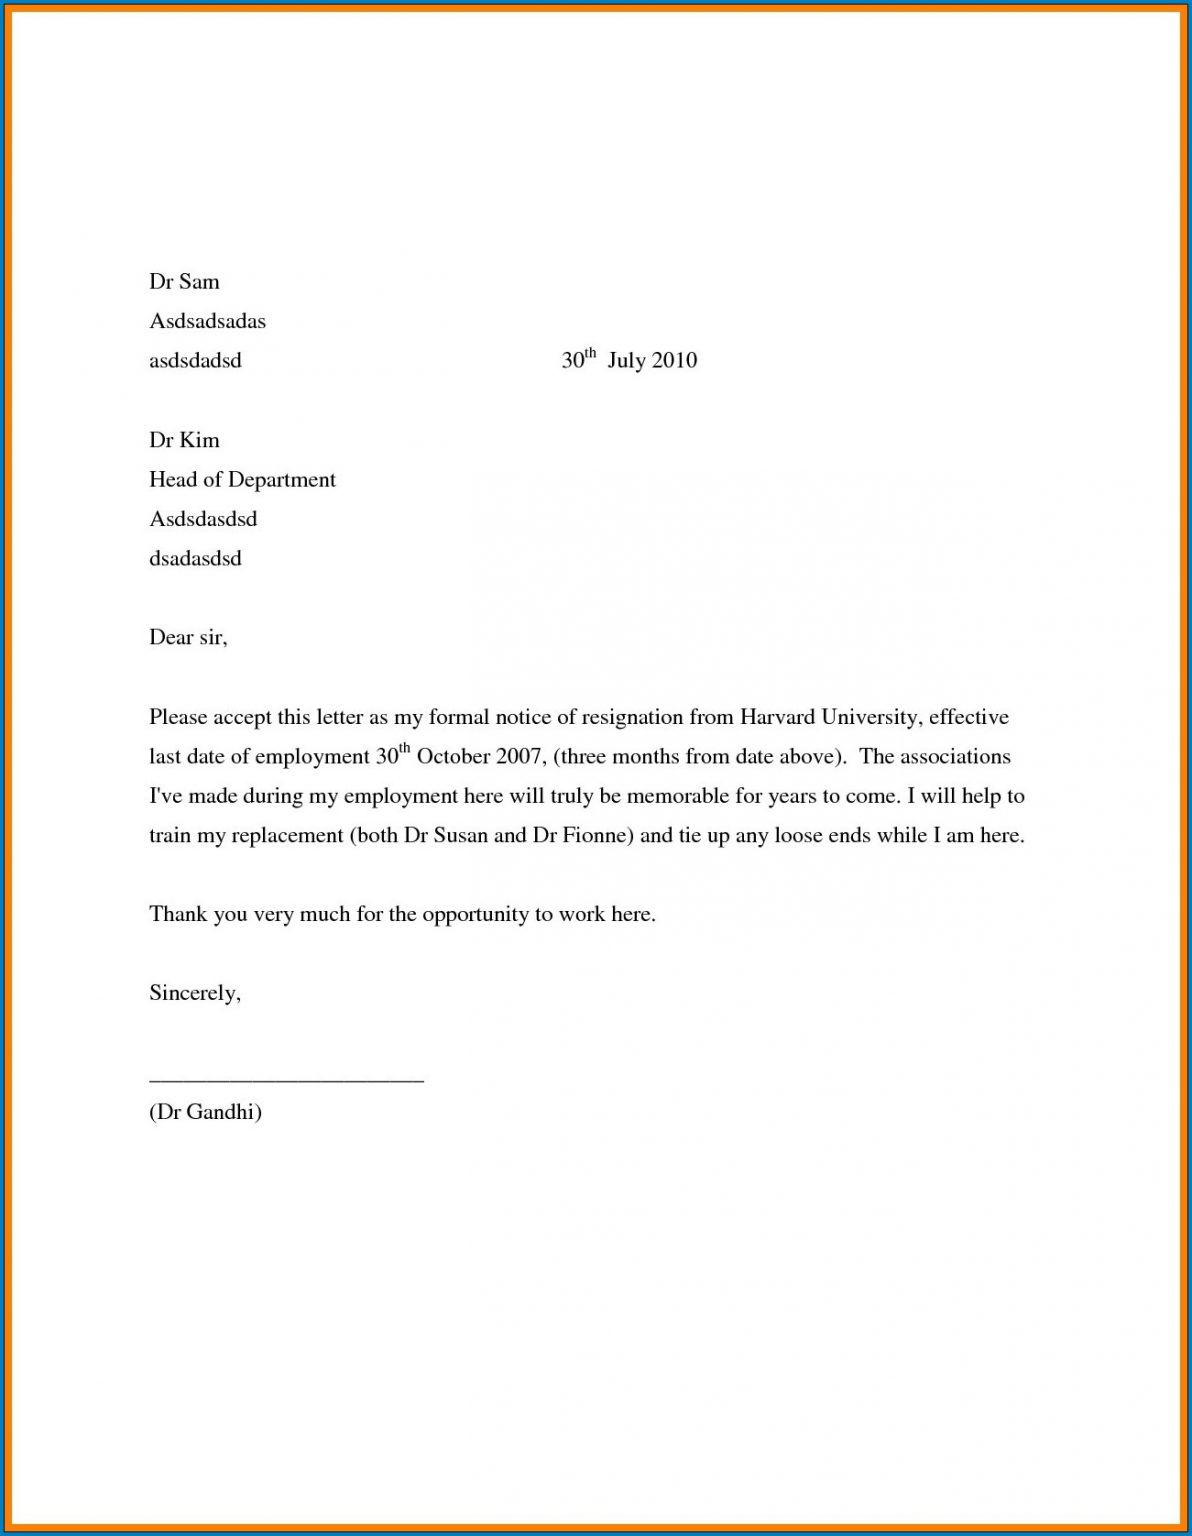 how to write a letter resignation from work